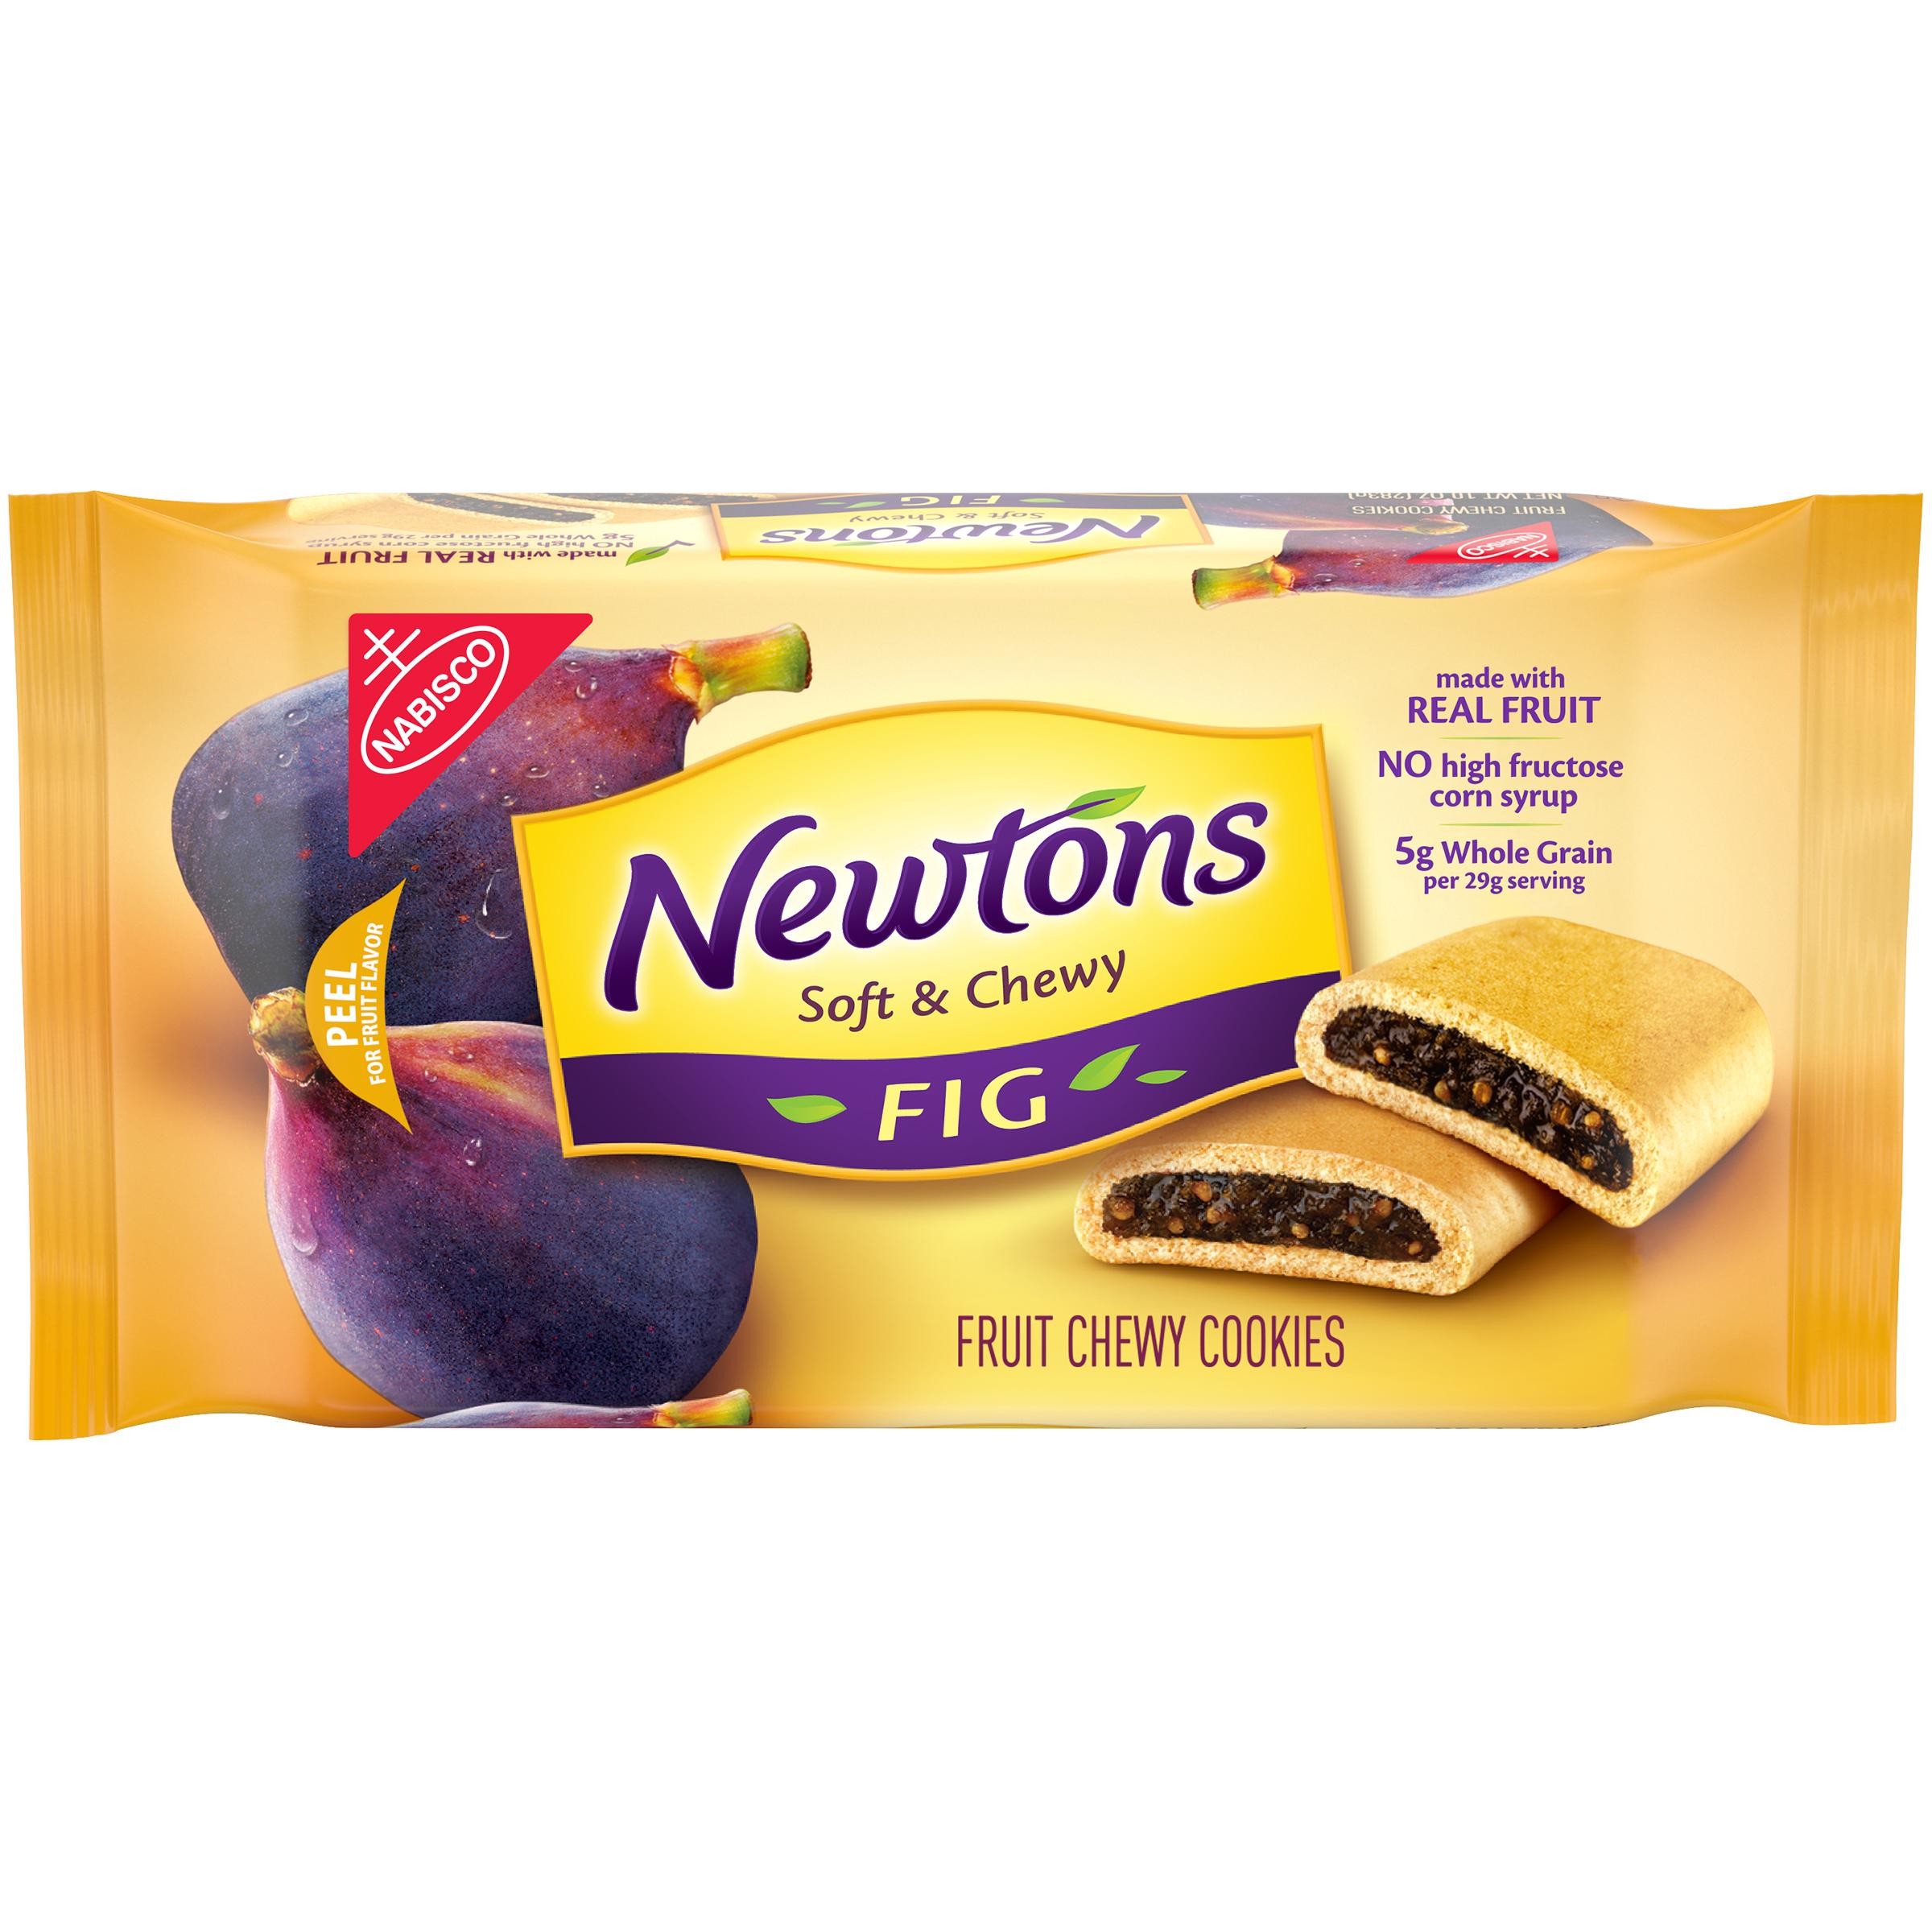 Nabisco Newtons Soft & Fruit Chewy Fig Cookies - 10 Oz